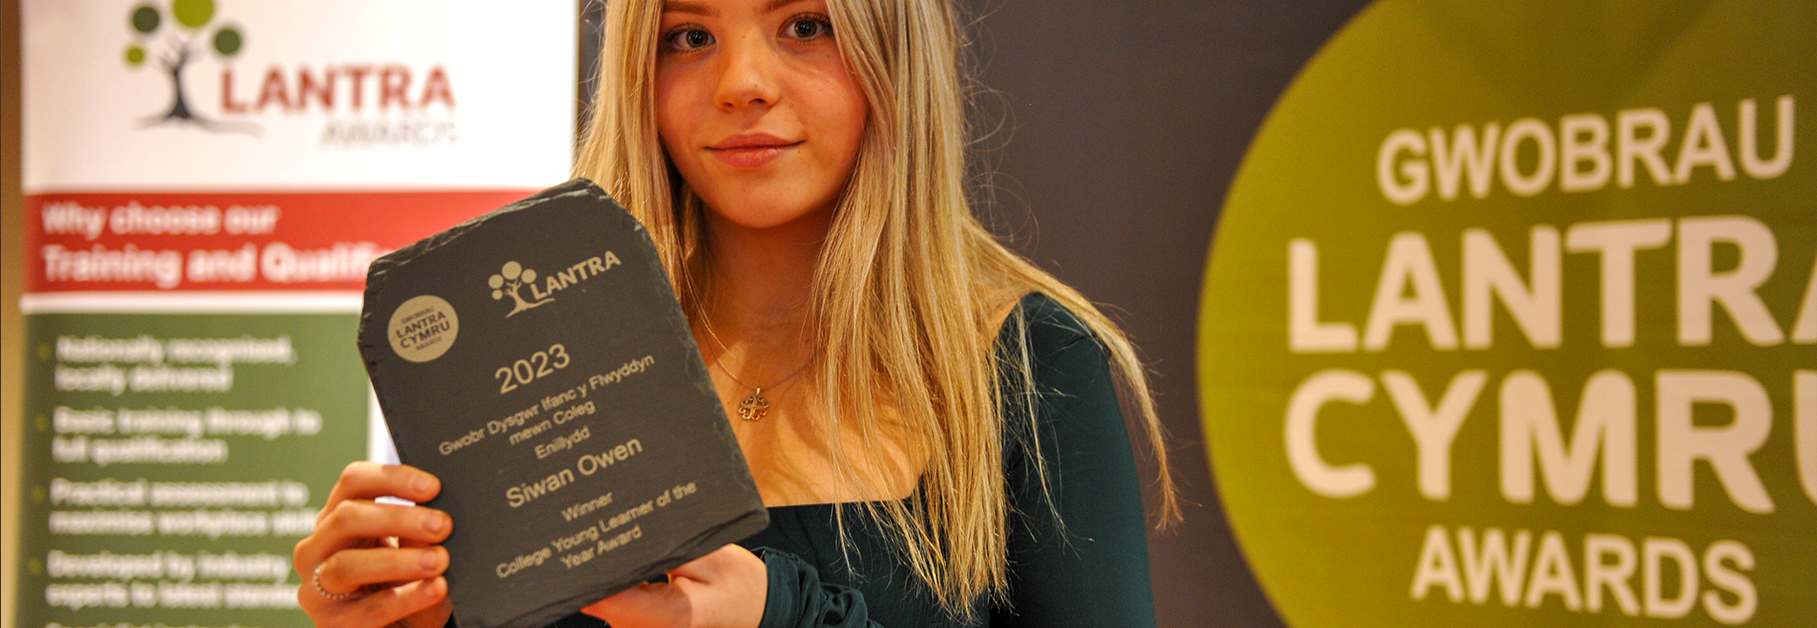 A photo of a Lantra Cymru Awards winner holding her statue in front of a branded banner